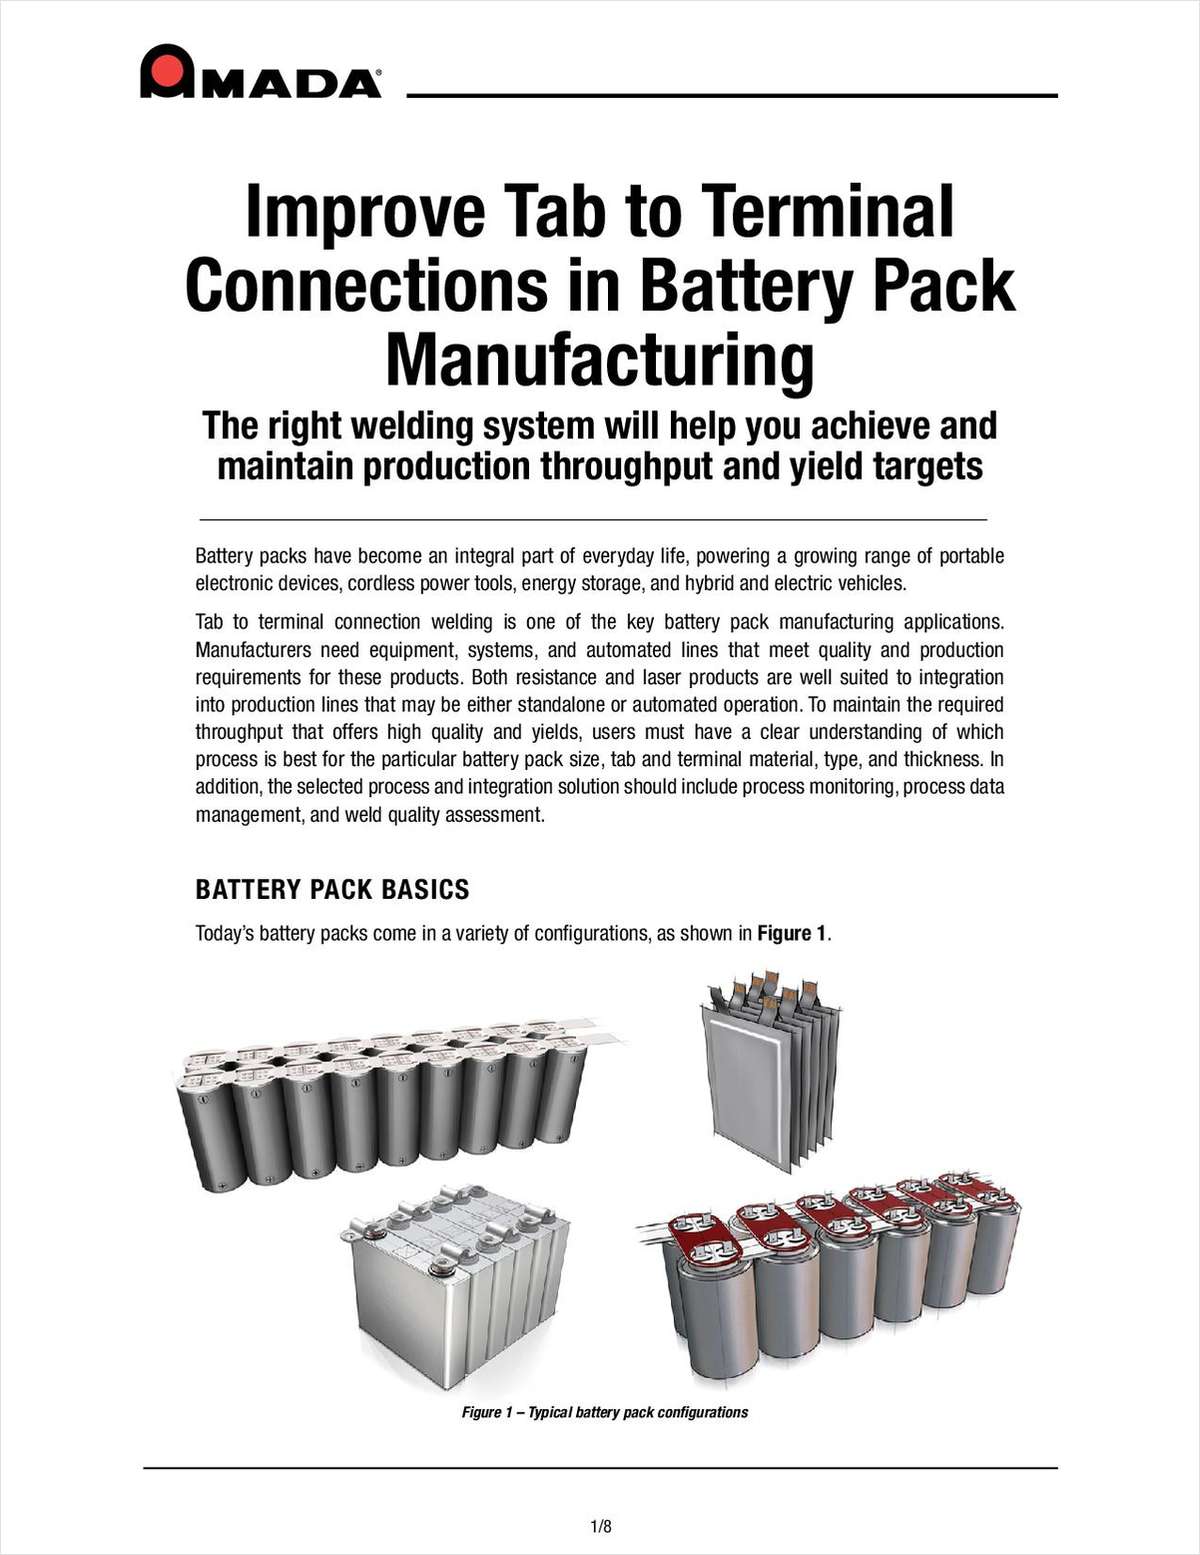 Improve Tab to Terminal Connections in Battery Pack Manufacturing